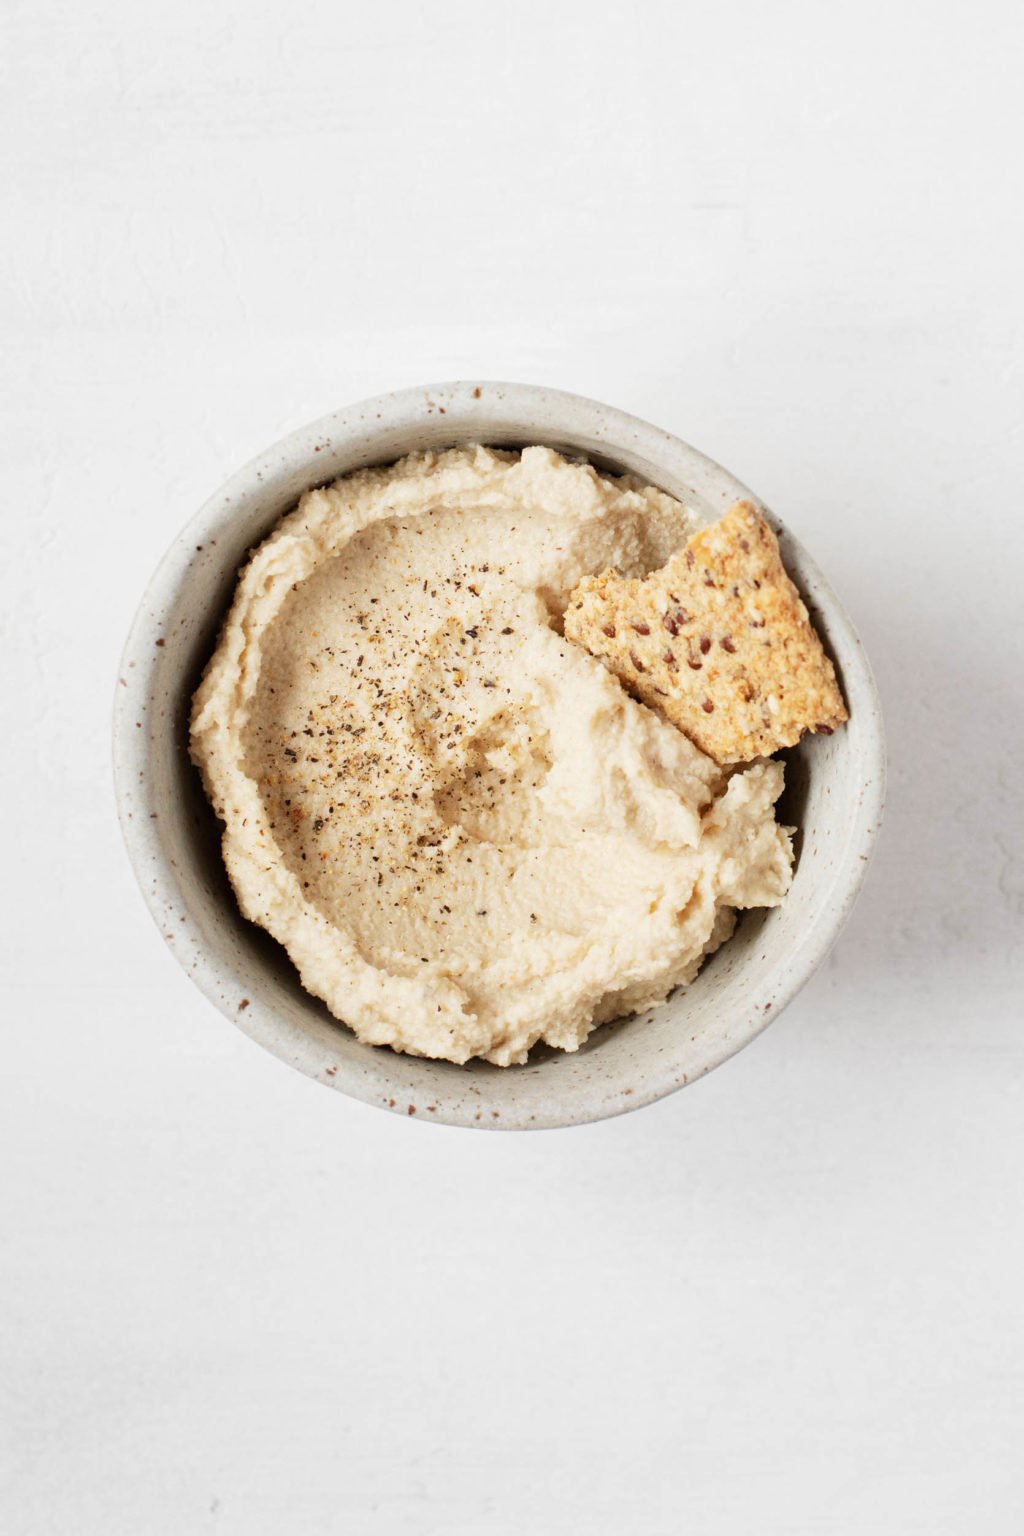 A small bowl is filled with dairy-free cheese spread and a whole grain cracker.